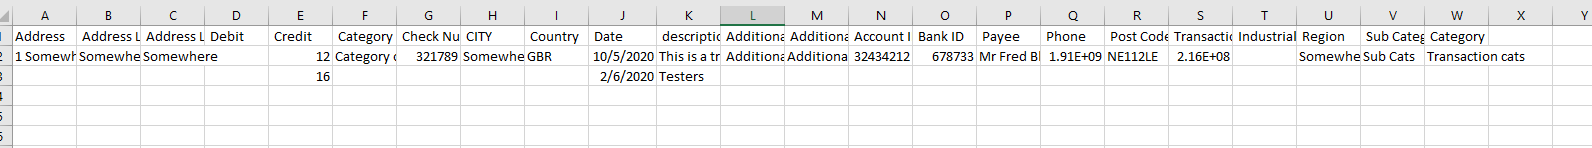 An image taken from a spreadsheet including transaction details.